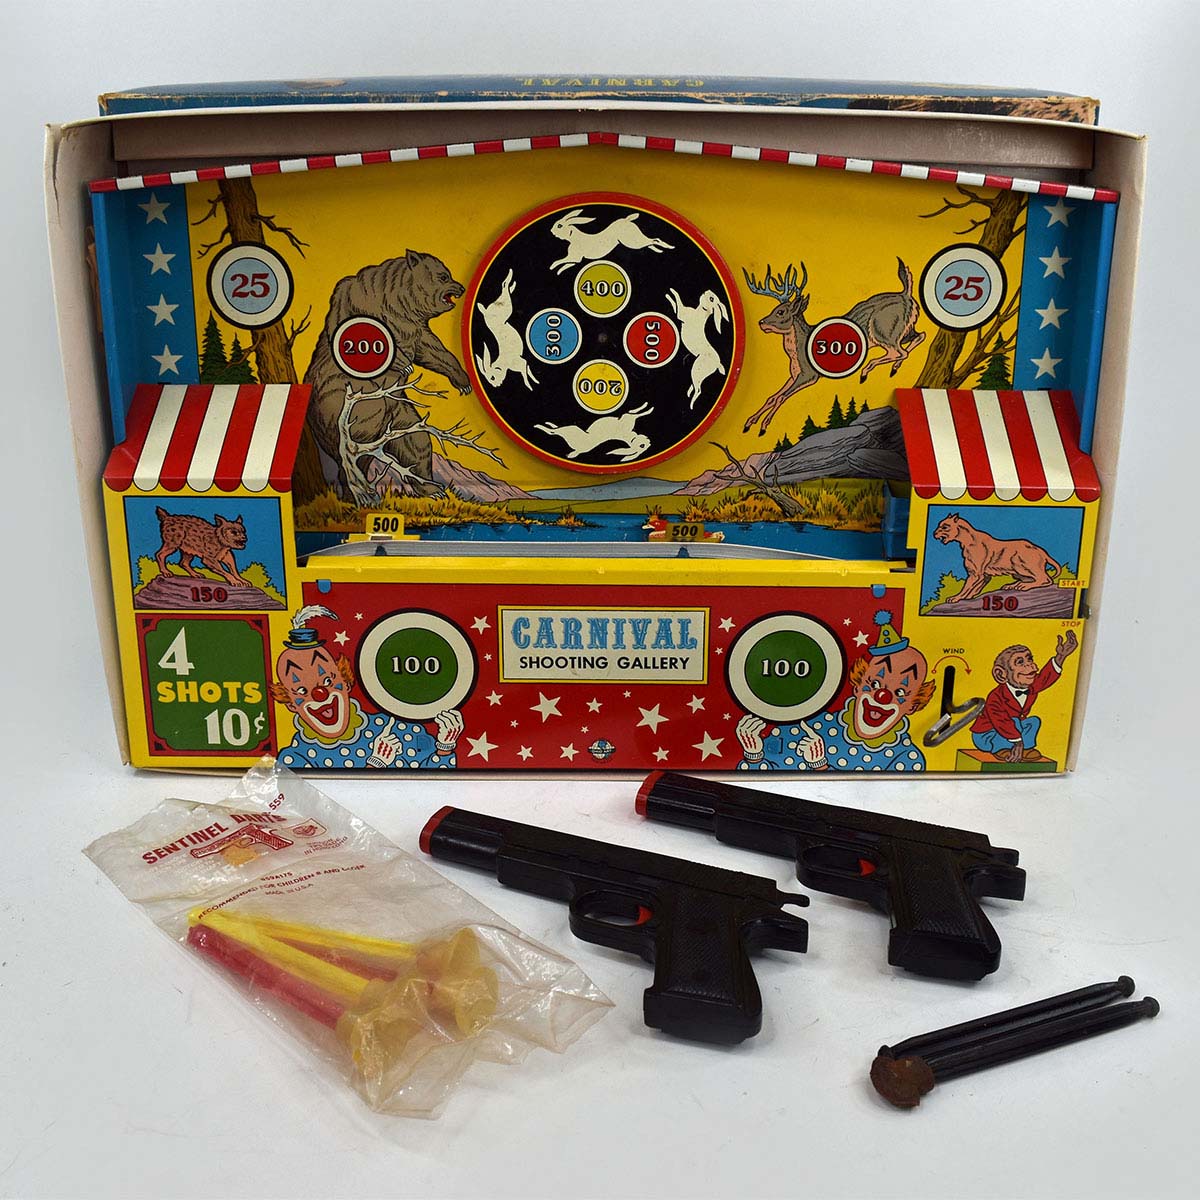 Buy carnival shooting gallery by Ohio Art Toys | 1960 Vintage Toy